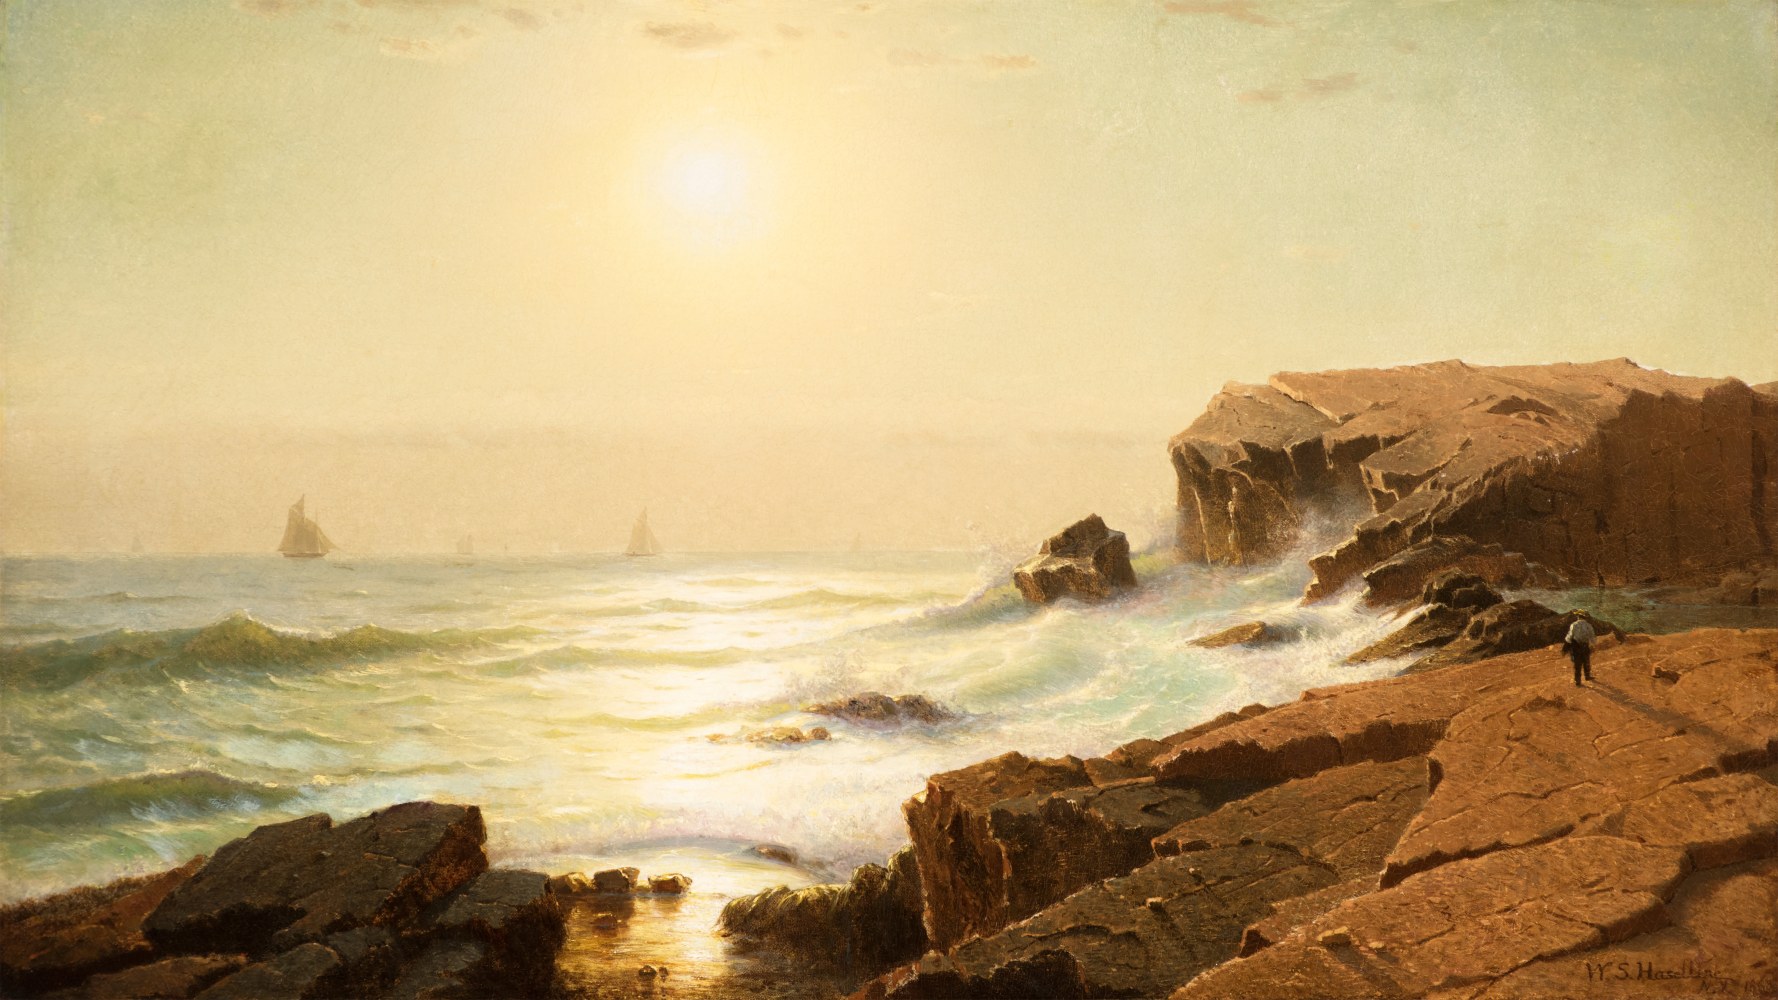 William Stanley Haseltine (1835–1900), Sunrise at Narragansett, Rhode Island, 1863, oil on canvas, 18 1/4 x 31 3/4 in., signed and dated lower right: W.S. Haseltine, N.Y. 1863